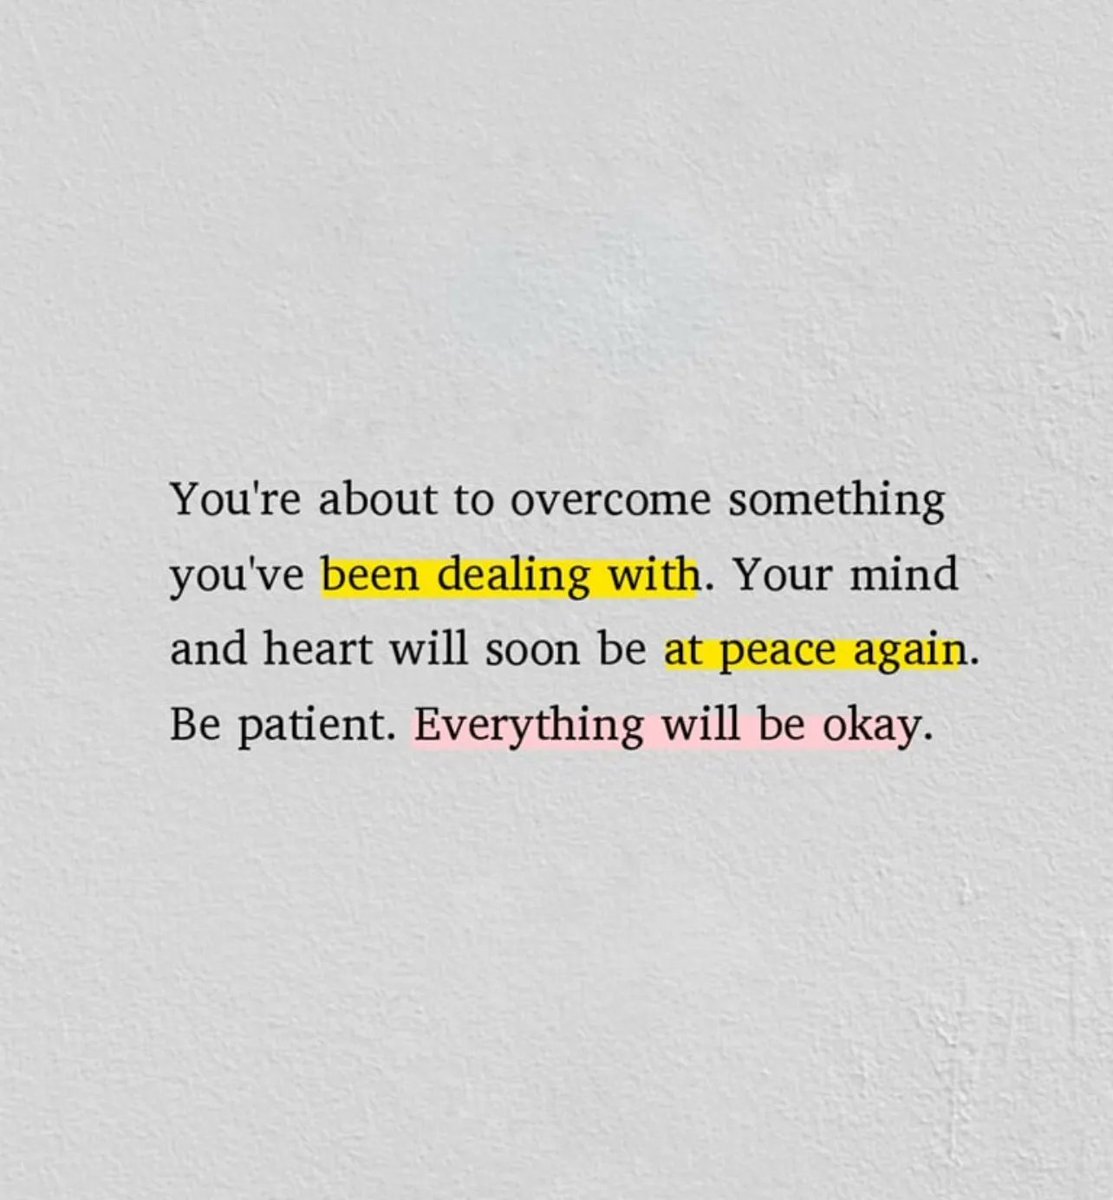 Be patient
Everything will be okay.
#HappyFriday